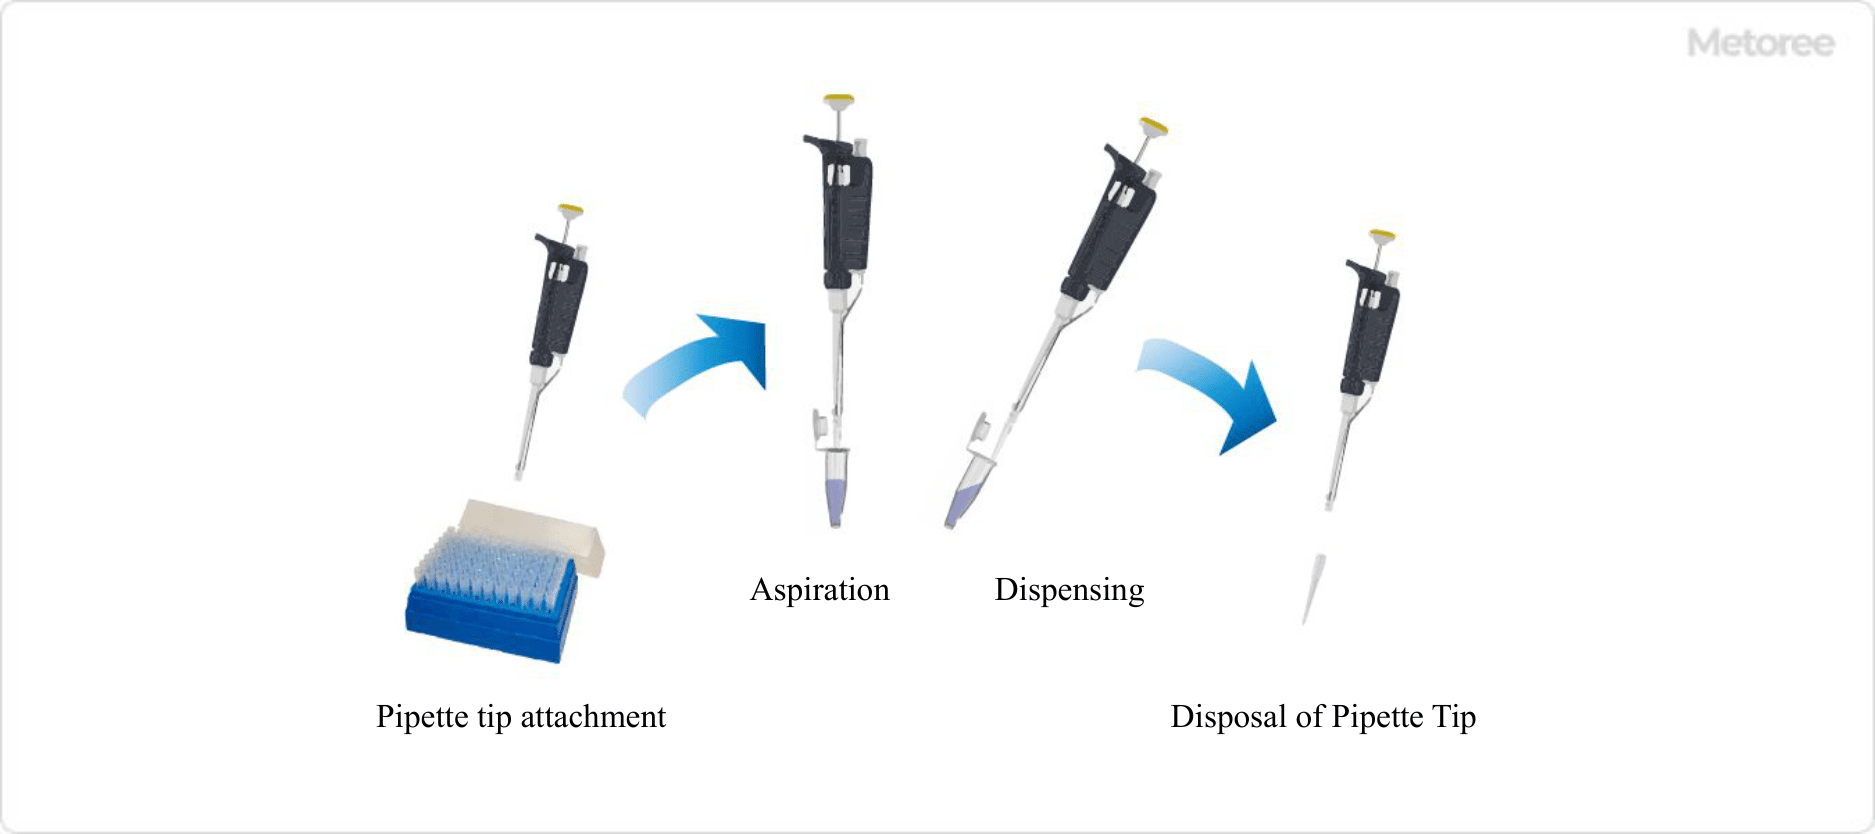 Figure 2. How to use pipette tips